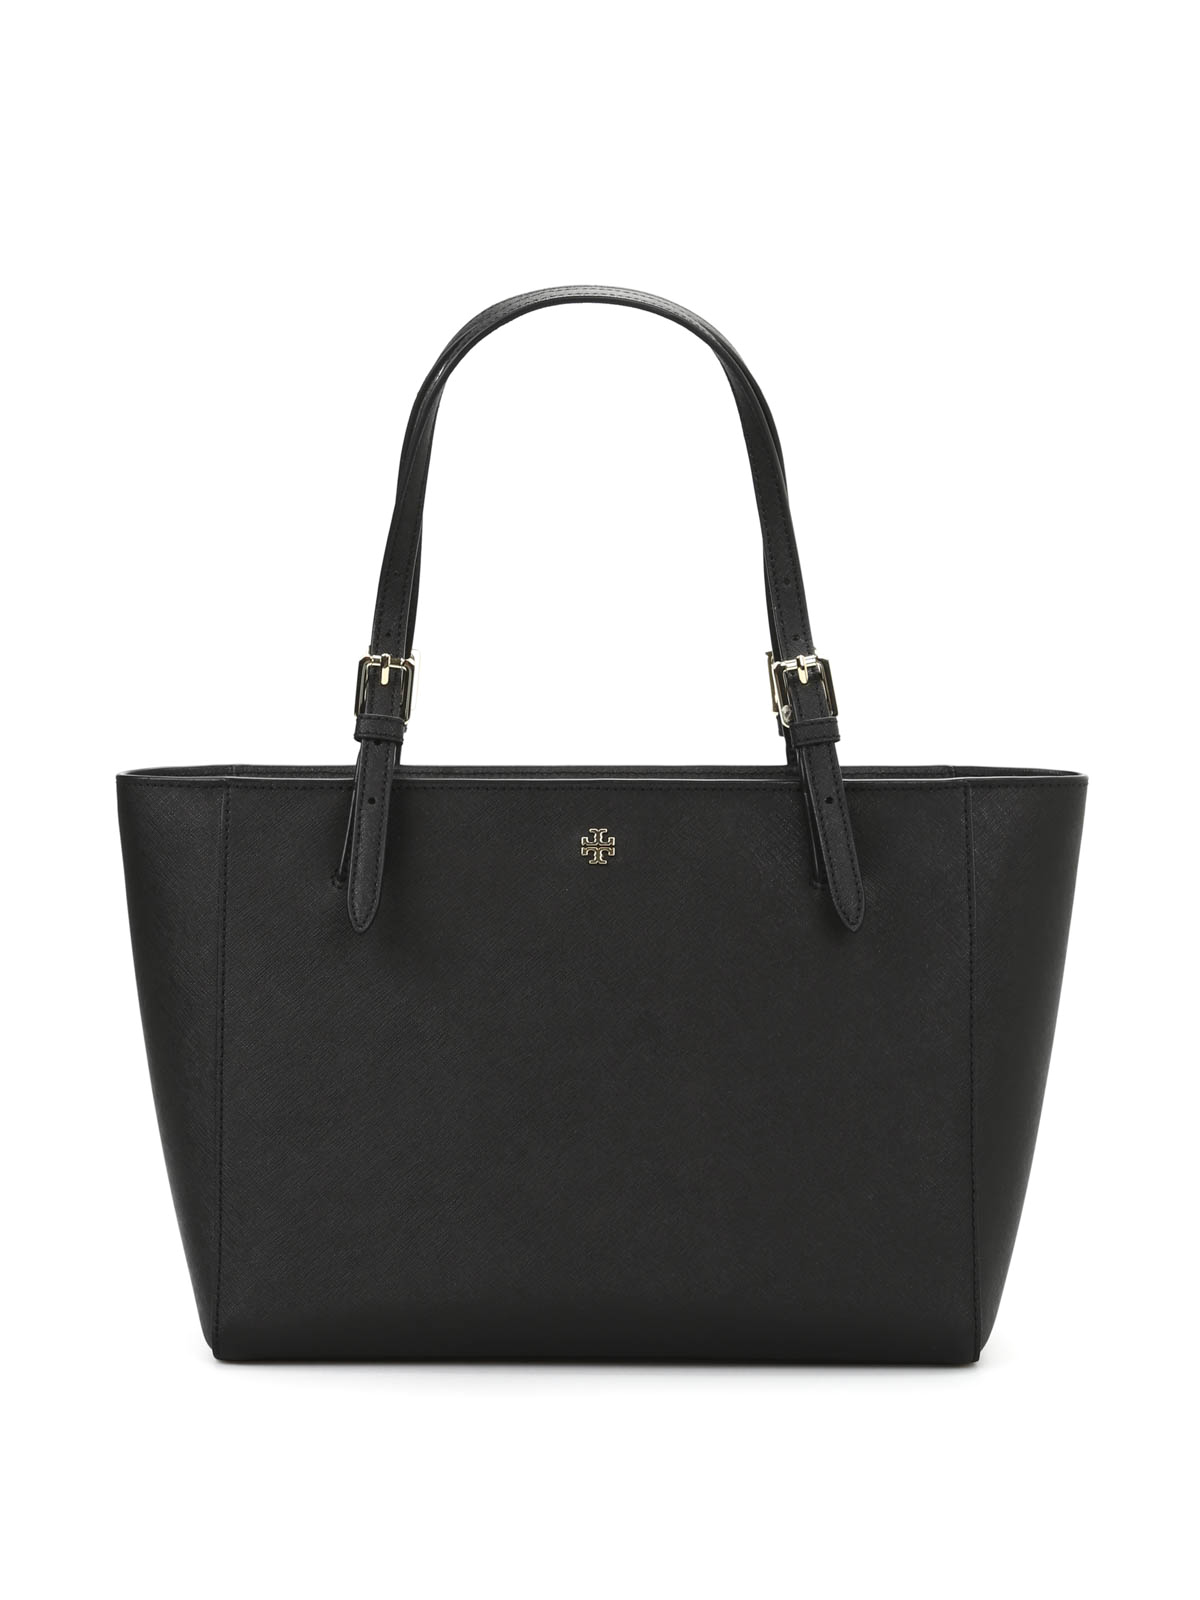 Totes bags Tory Burch - York small buckle tote - 3115978115001